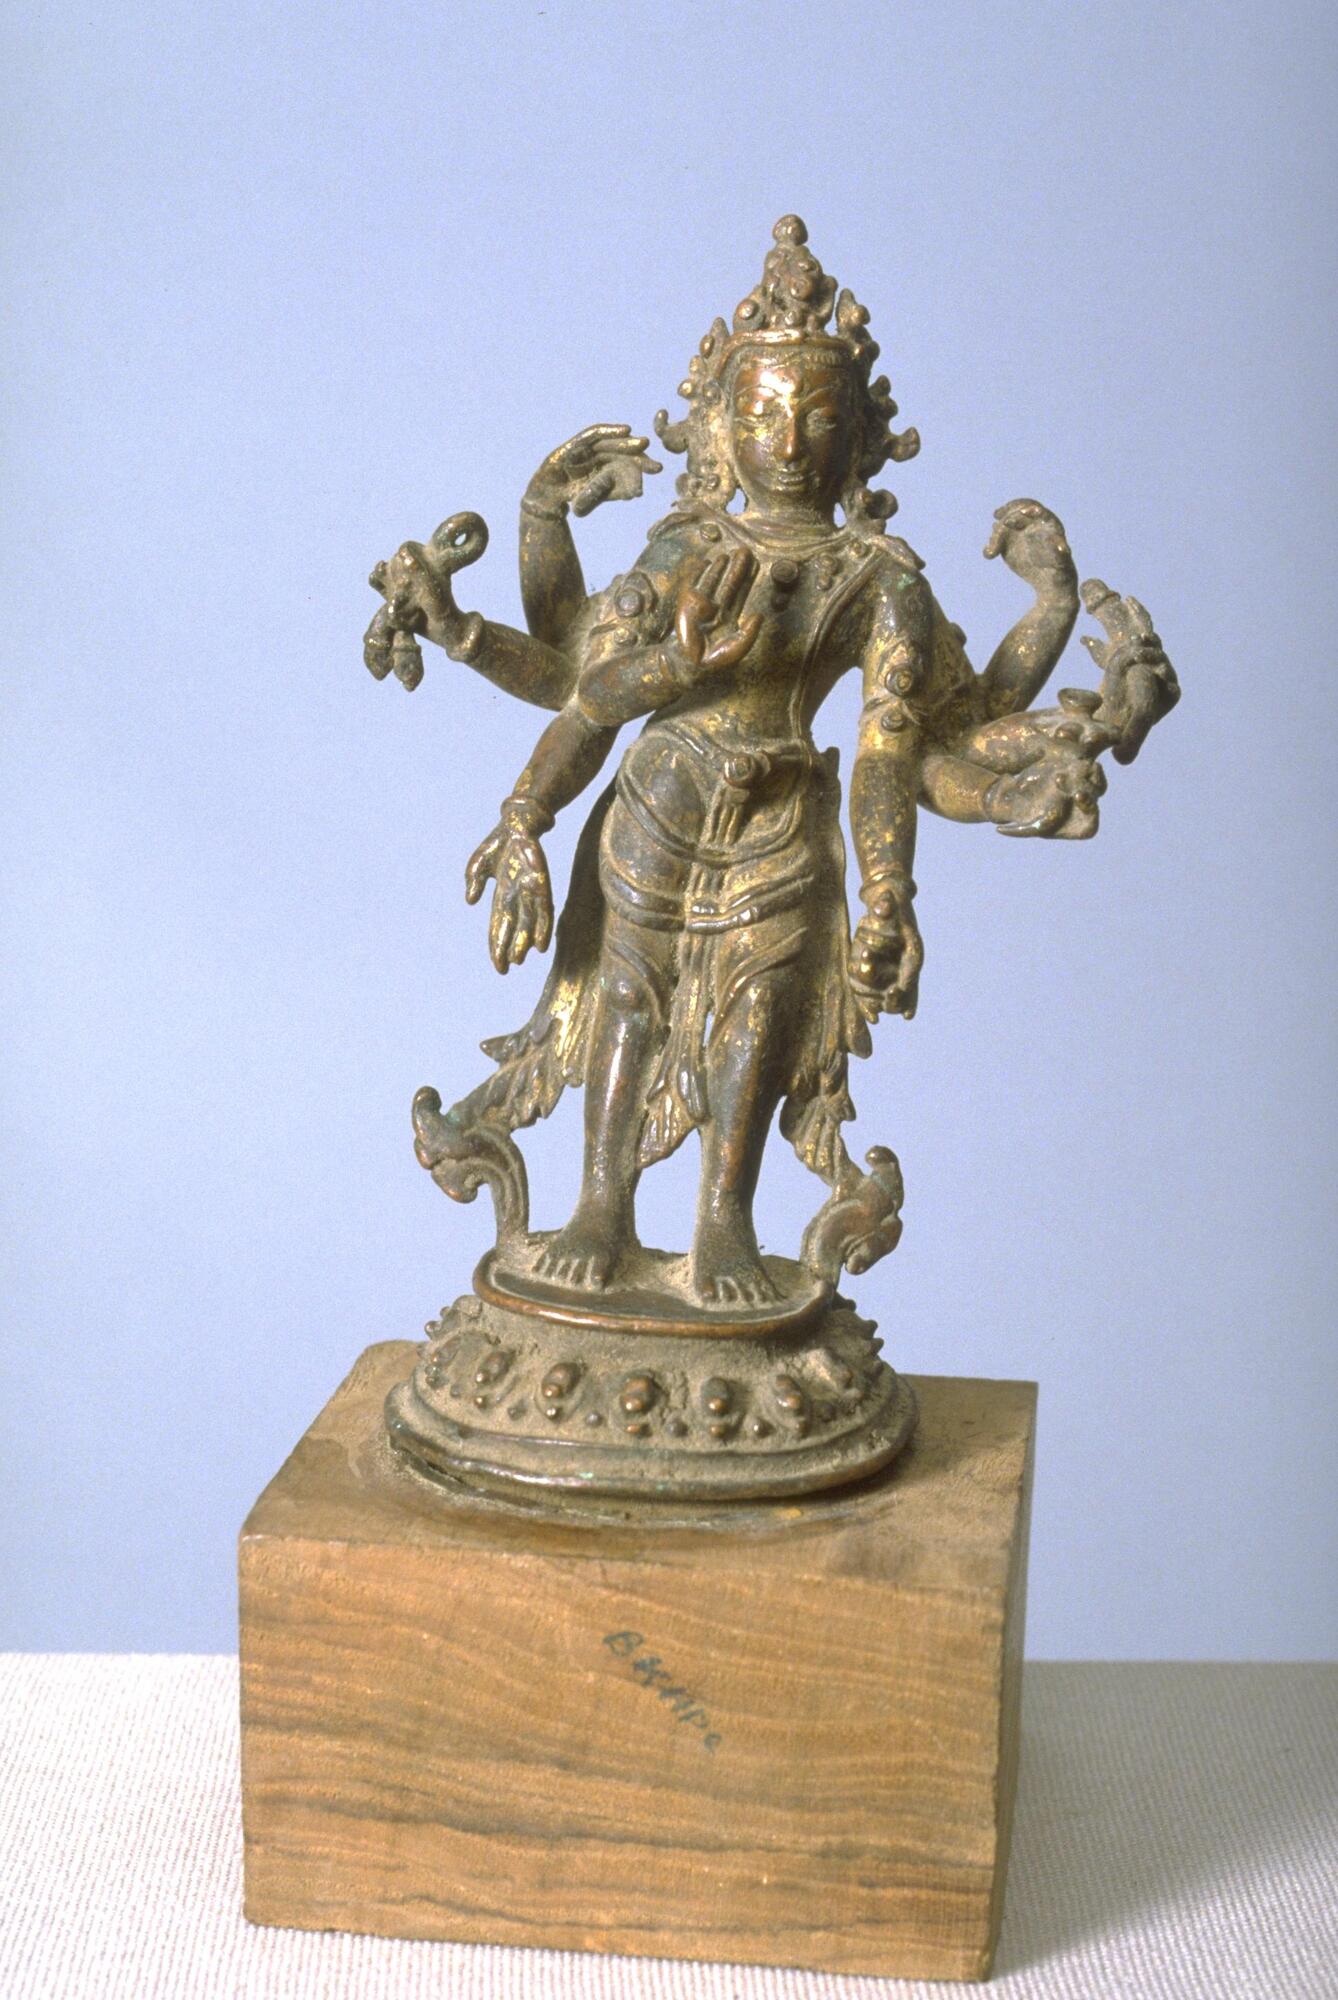 A small bronze figure of Amoghapasa, a Buddhist deity, made by the cire perdue (lost wax) casting method. The challenge to the caster is this case is the top-heaviness of the piece caused by the iconographical requirement for the image to have eight arms; in at attempt to provide some support, he arranging floating scarves to drape all the way to the lotus pedestal.